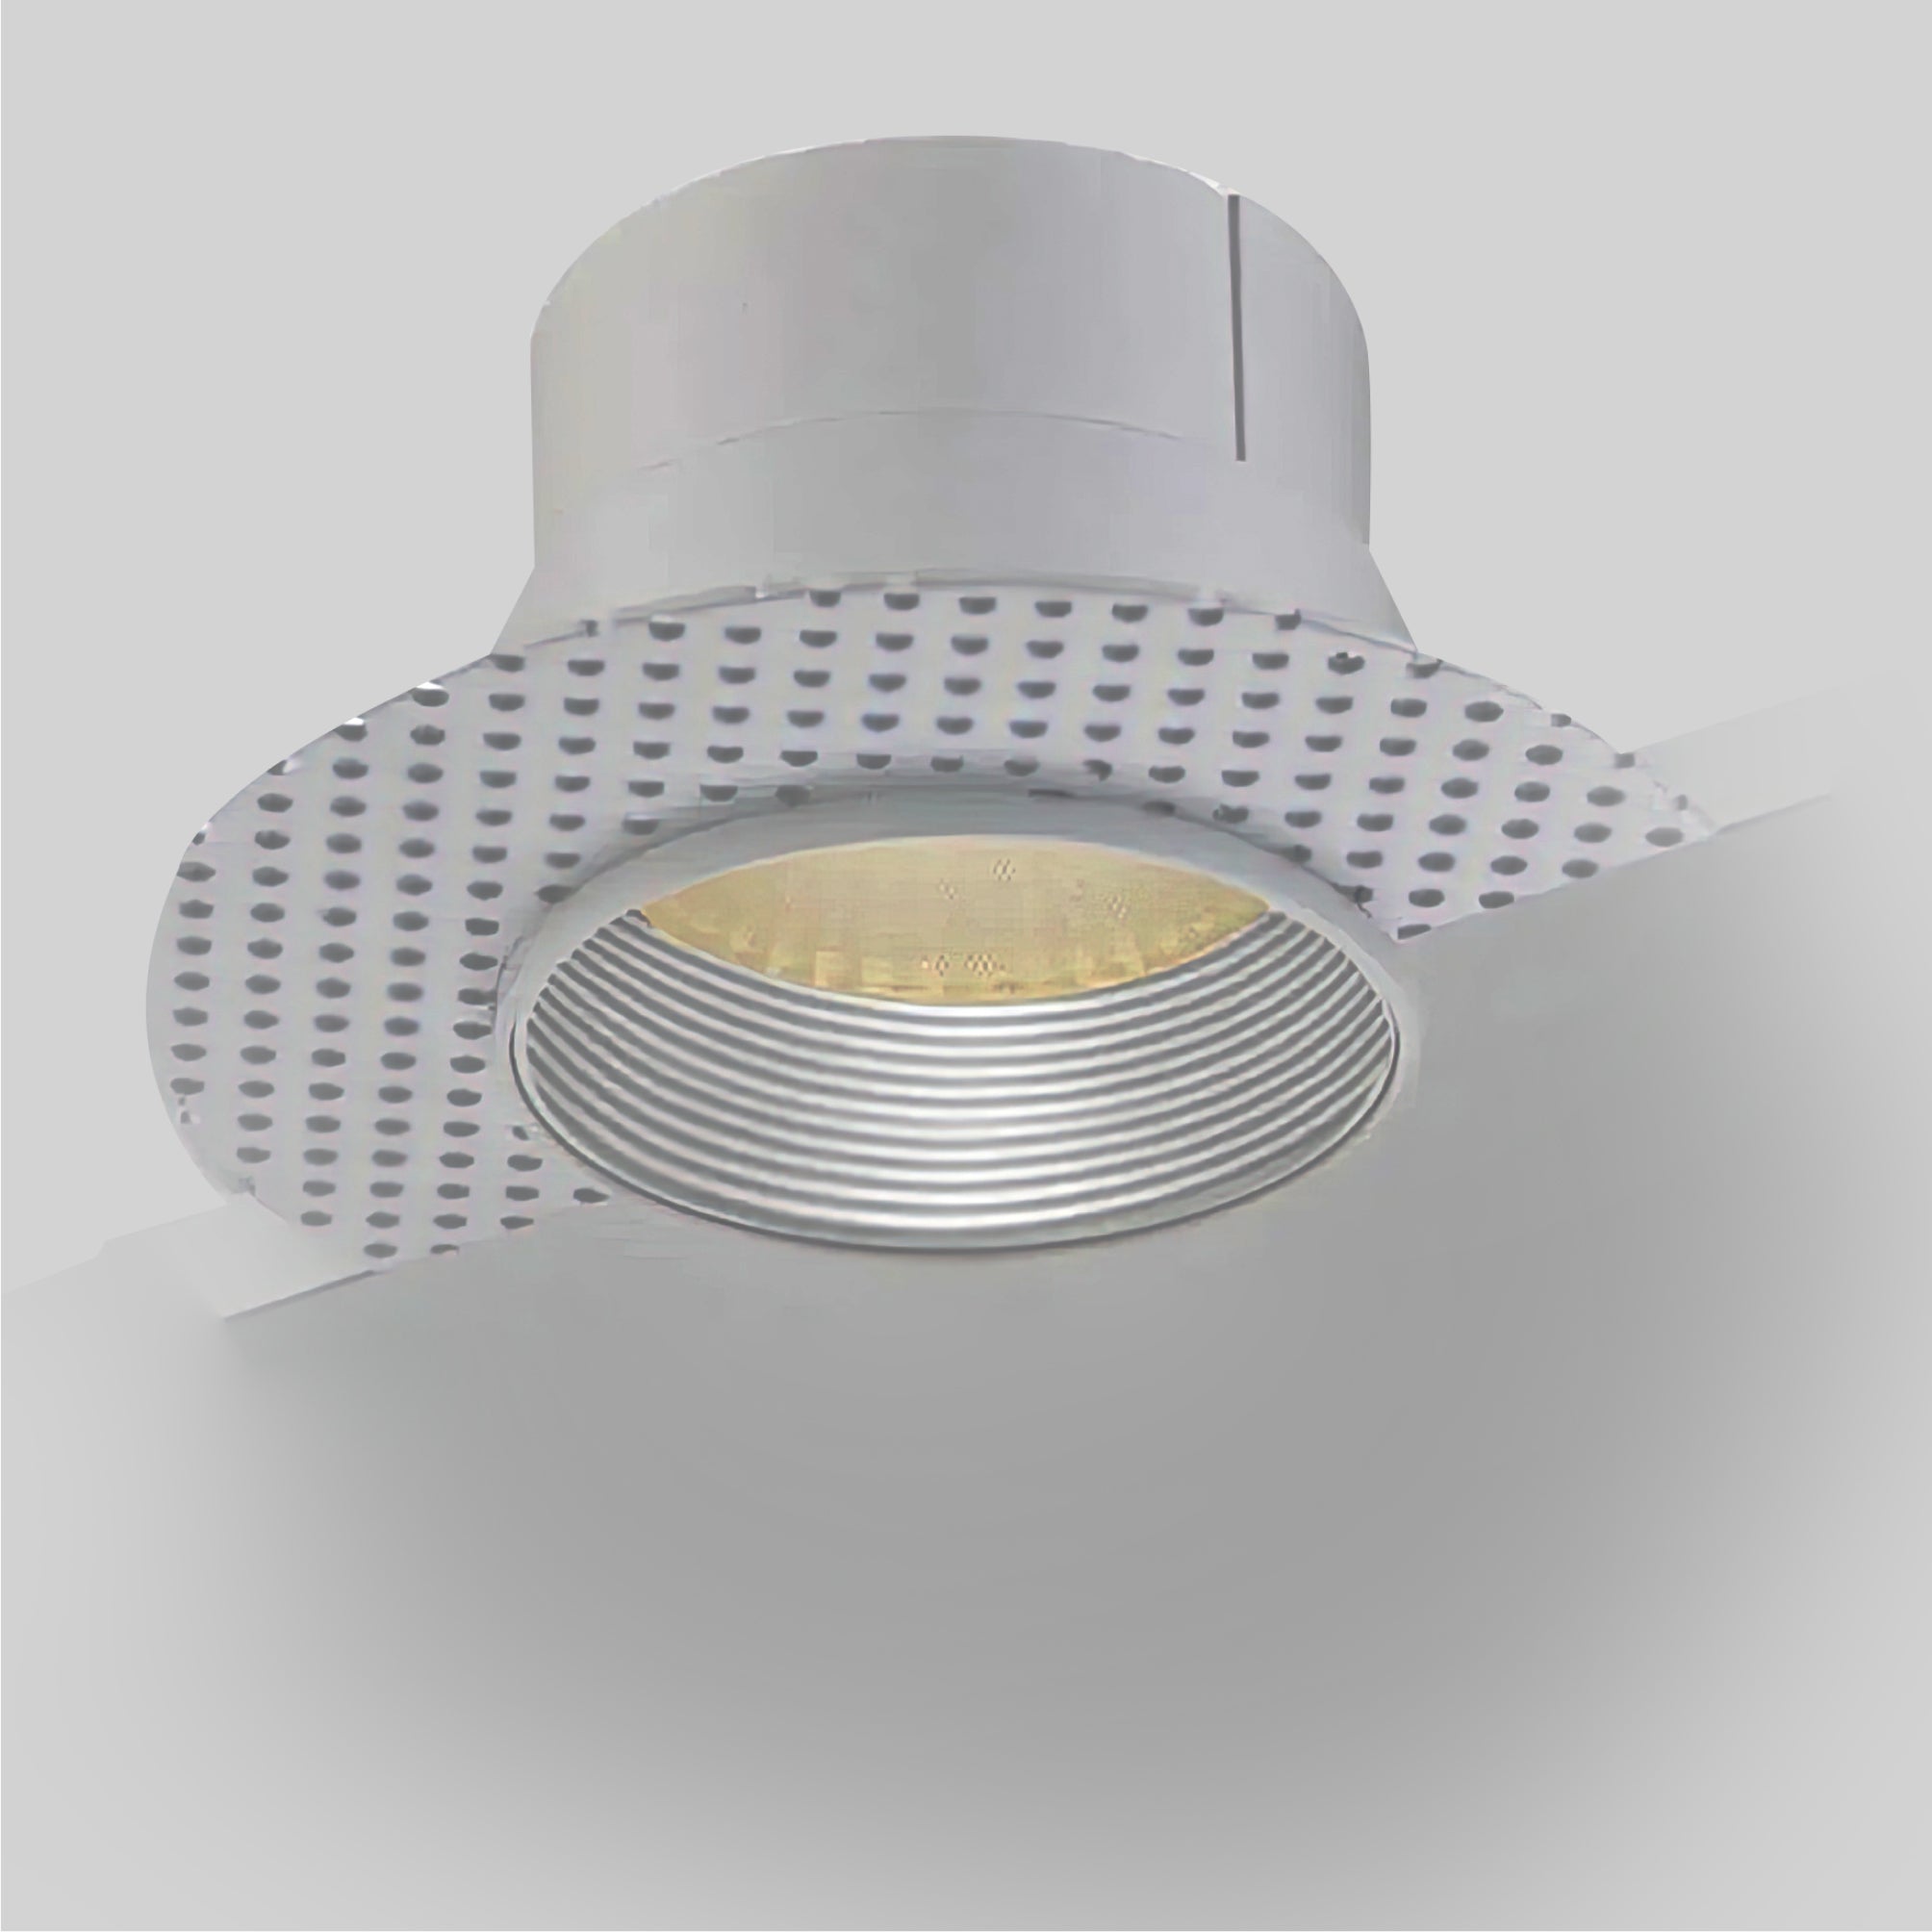 Illusion 4-Inch LED Wall Wash Recessed Light